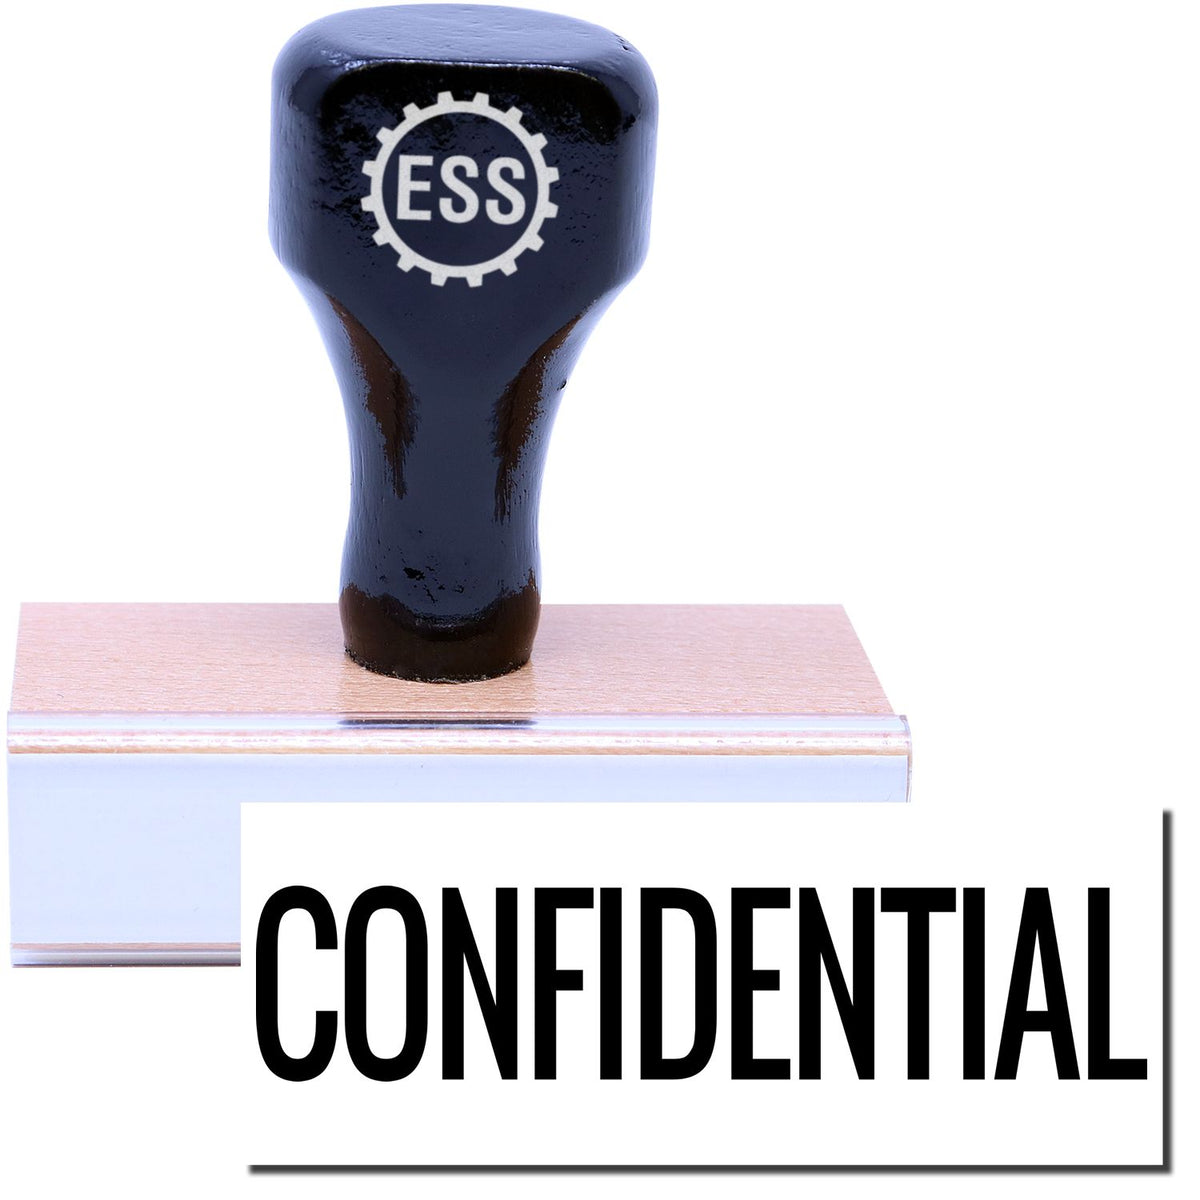 A stock office rubber stamp with a stamped image showing how the text &quot;CONFIDENTIAL&quot; in a large narrow font is displayed after stamping.